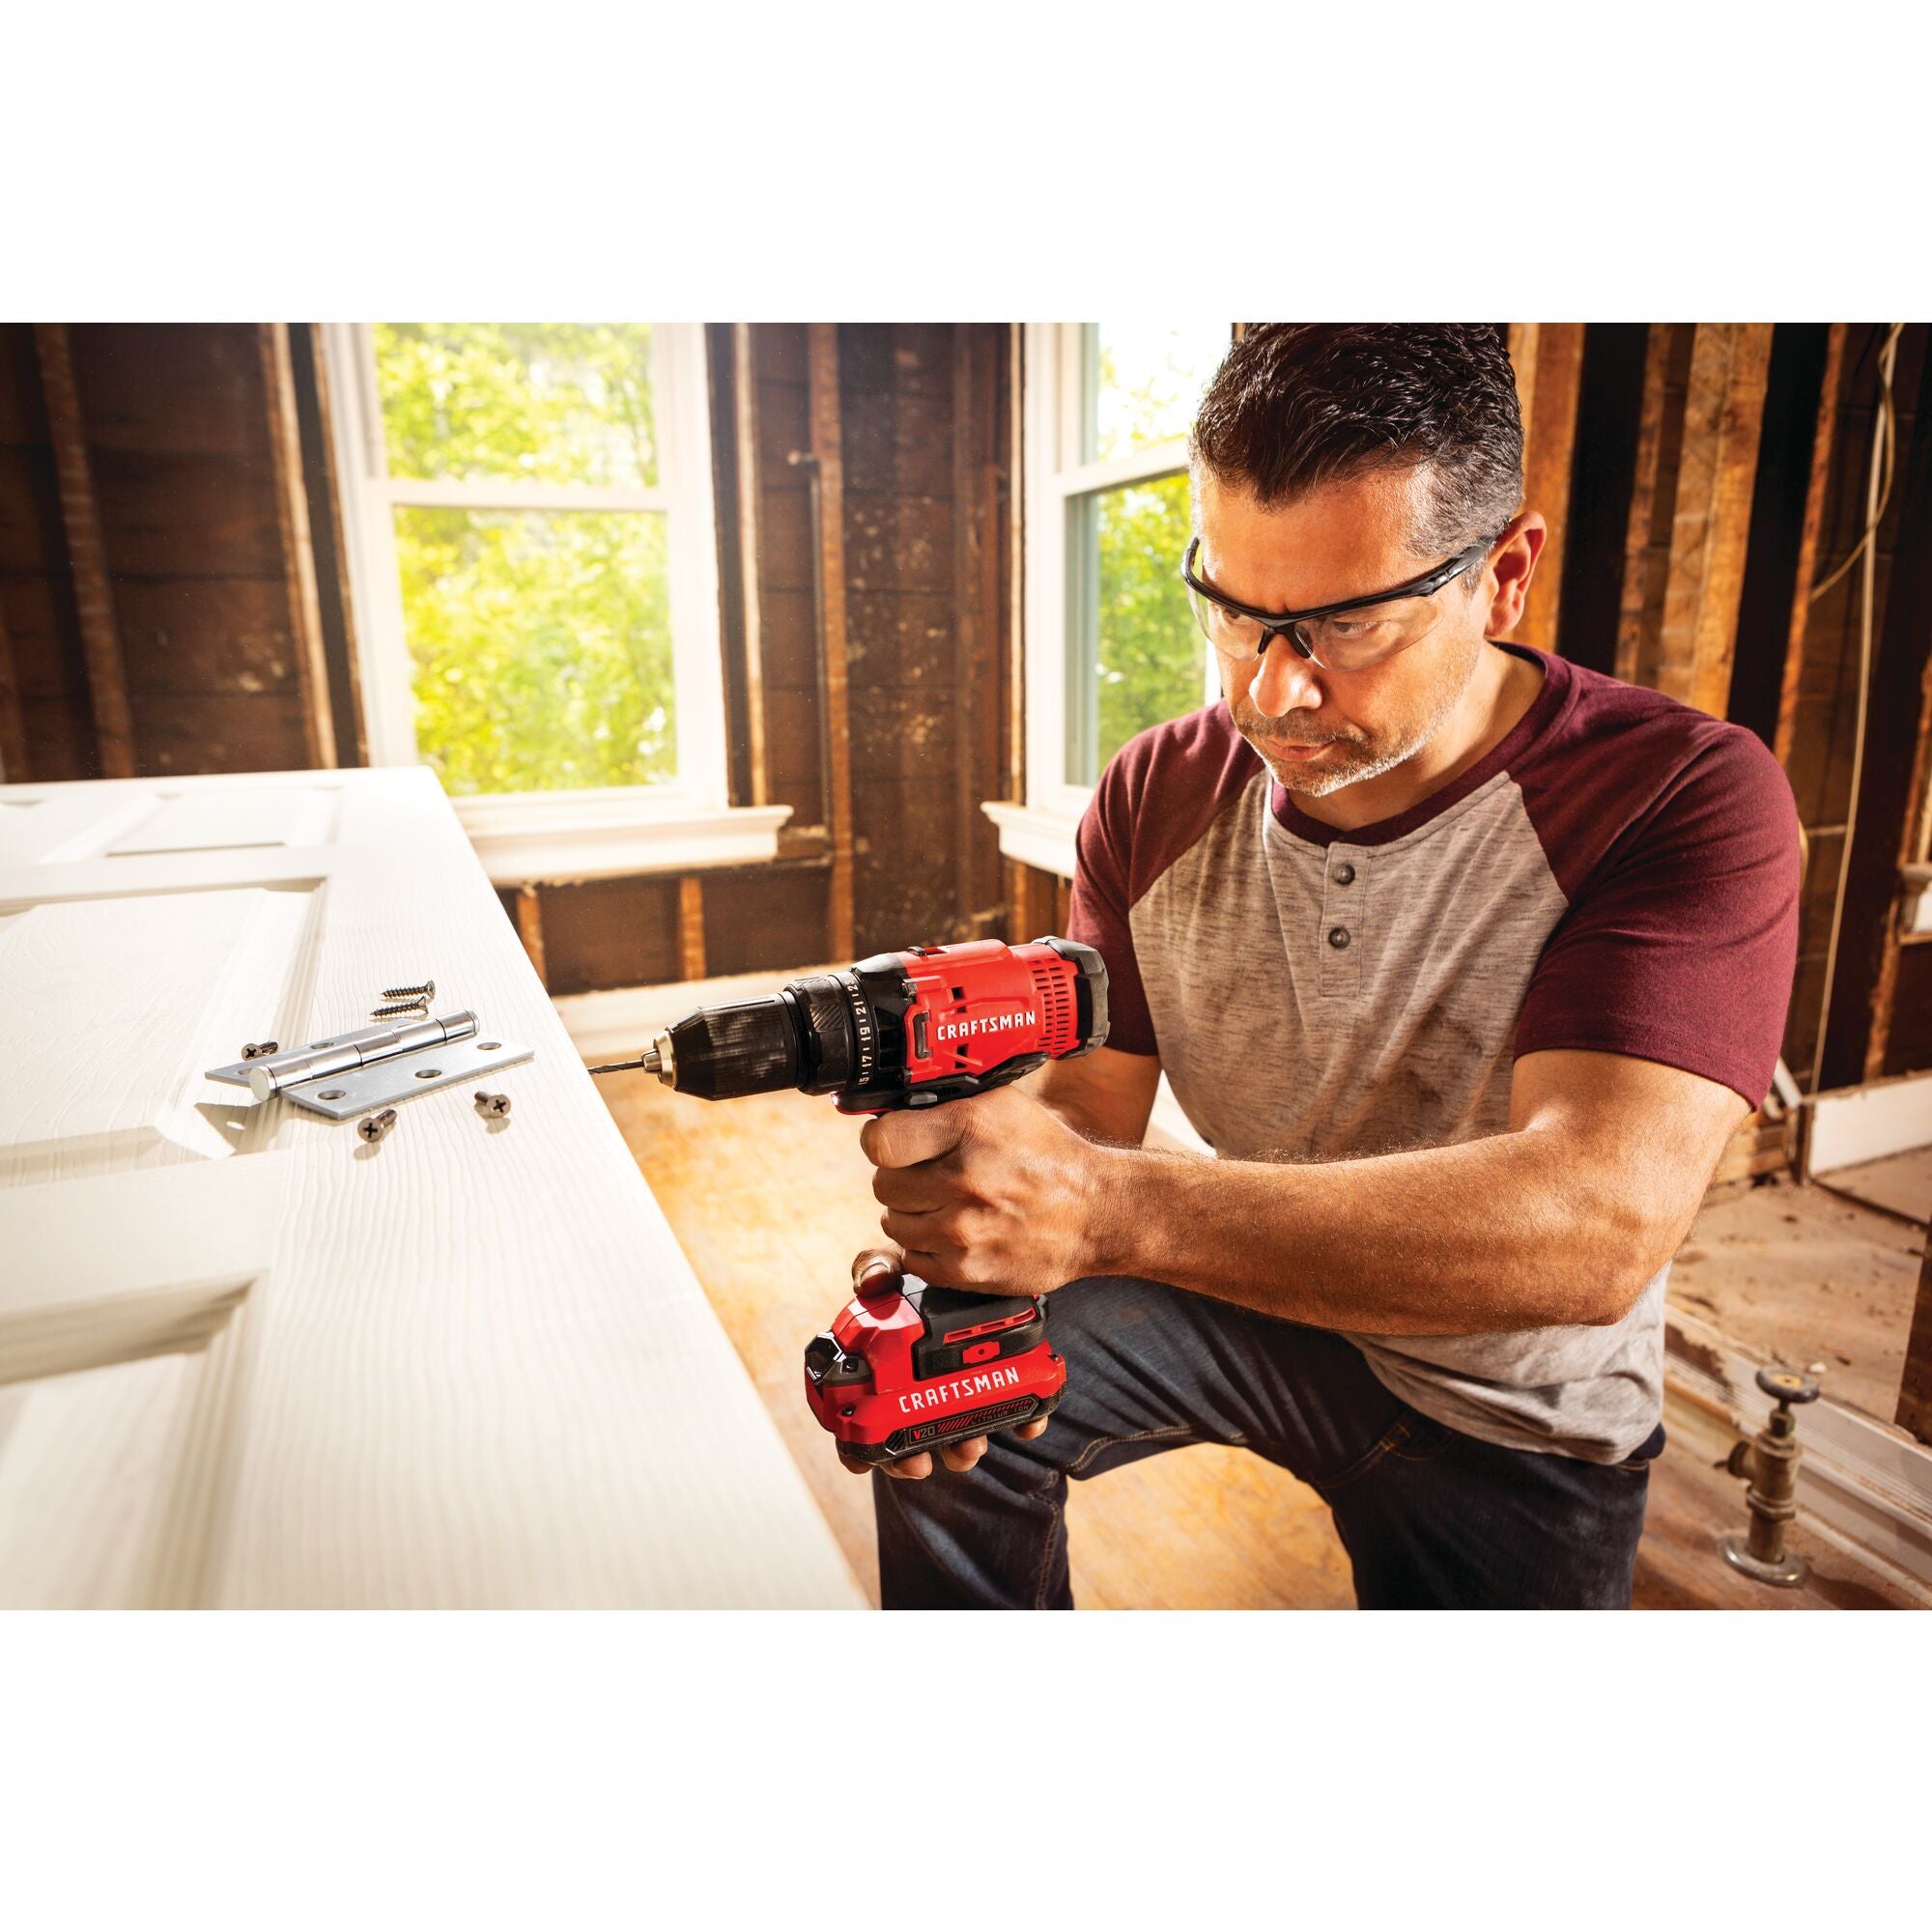 BLACK+DECKER 20V MAX Cordless Drill and Driver, 3/8 Inch, With LED Work  Light